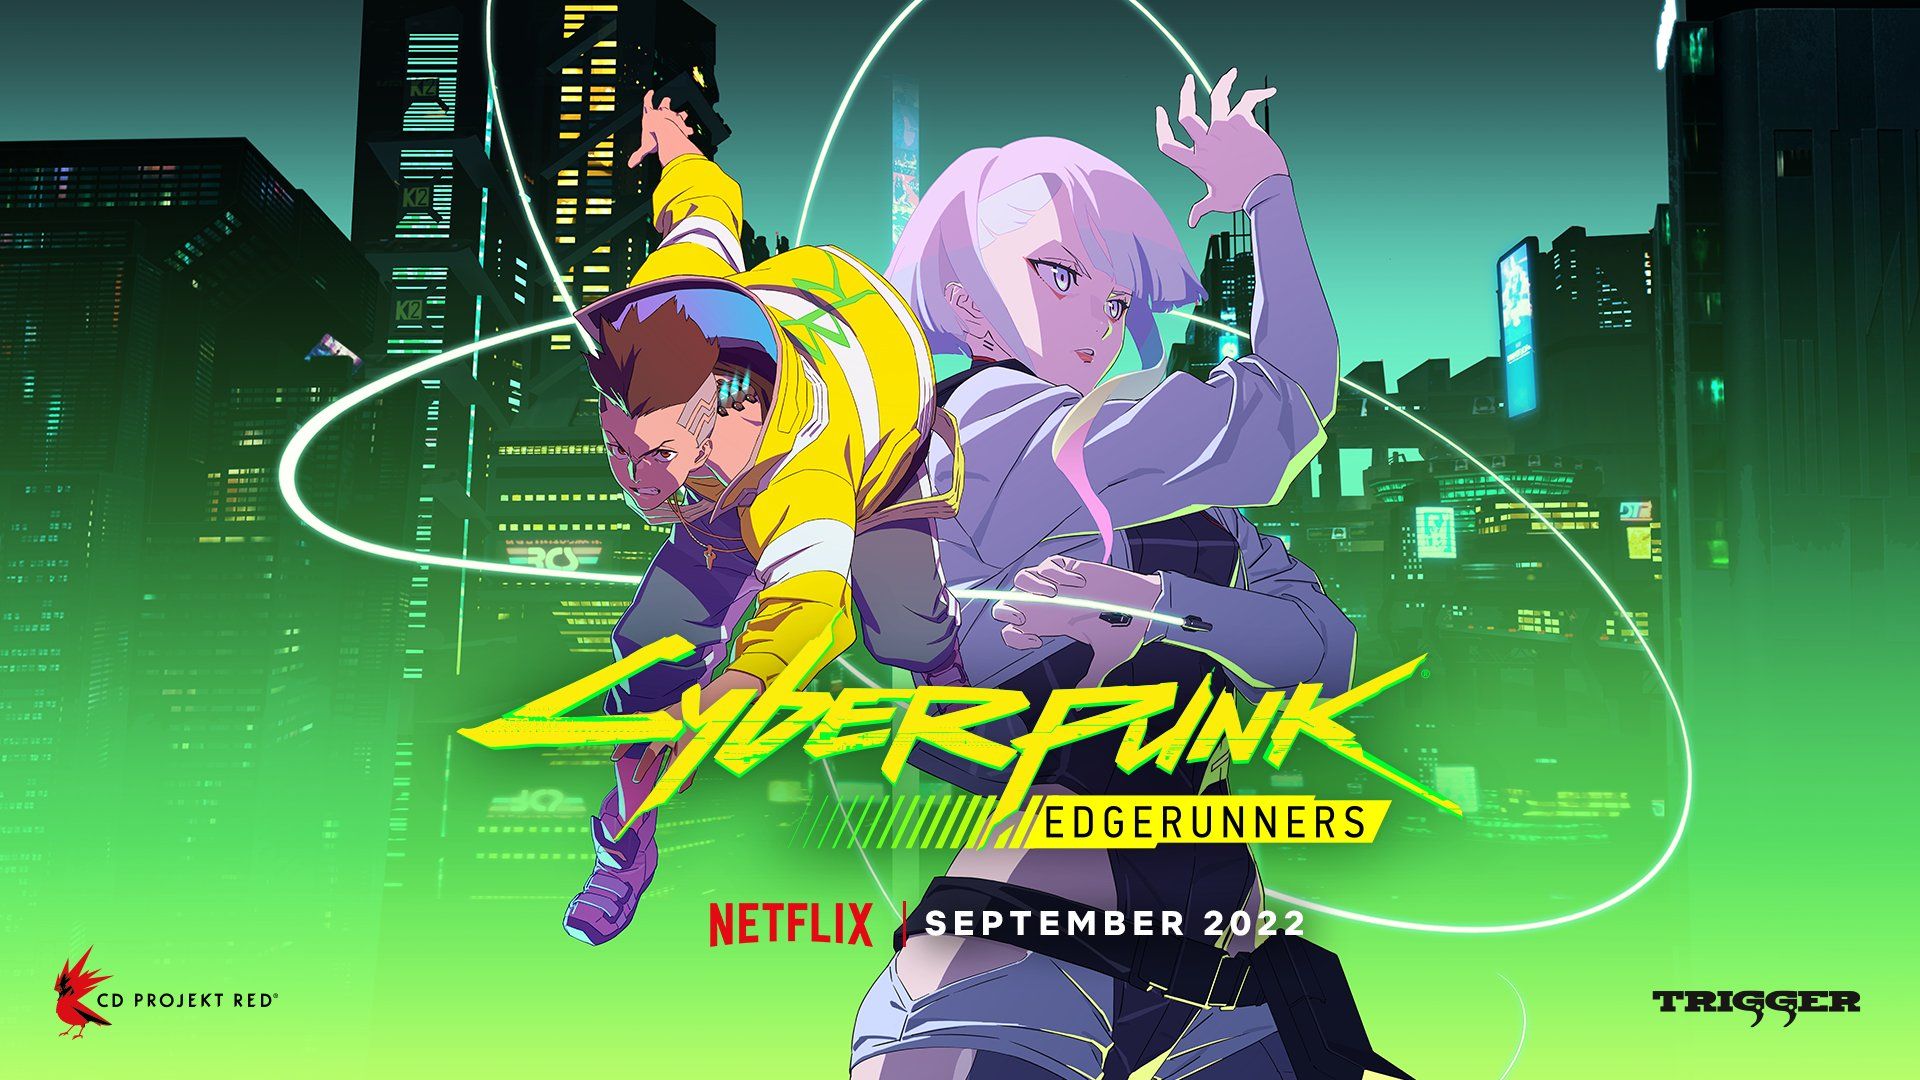 CYBERPUNK EDGERUNNERS!! 🦾🦿💥 Have you watched the anime yet?? Props to  studio trigger for the awesome animation style, loved the…